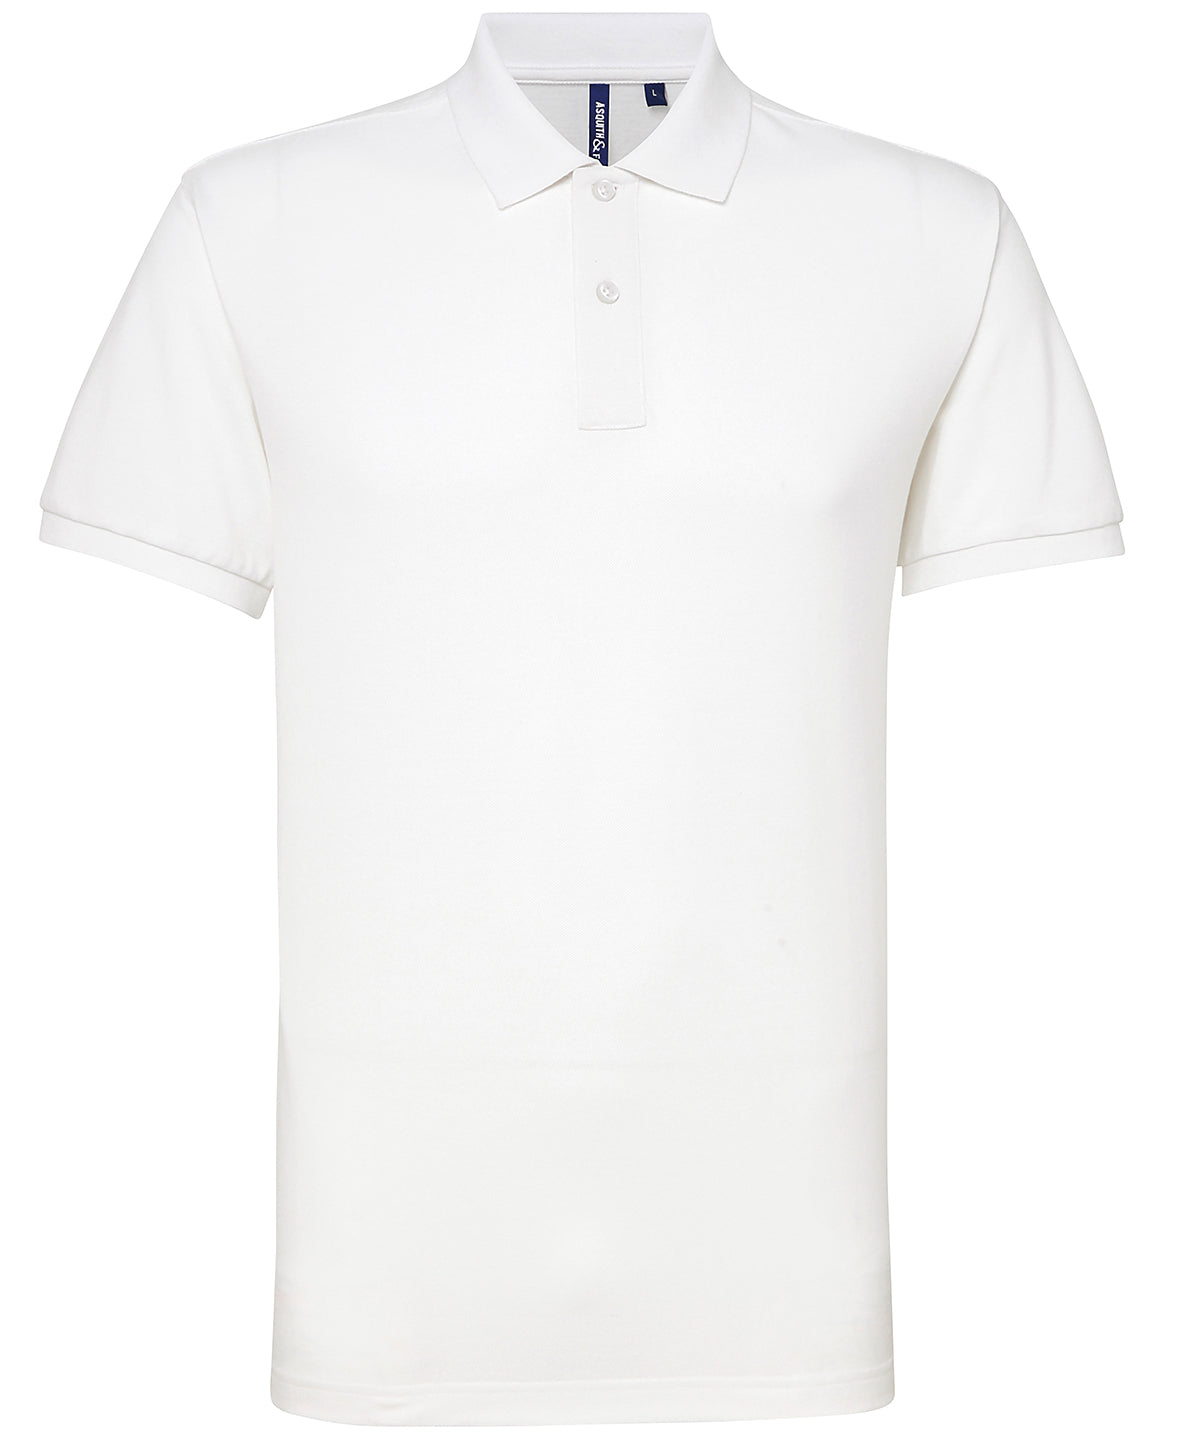 Personalised Polo Shirts - Royal Asquith & Fox Men’s polycotton blend polo